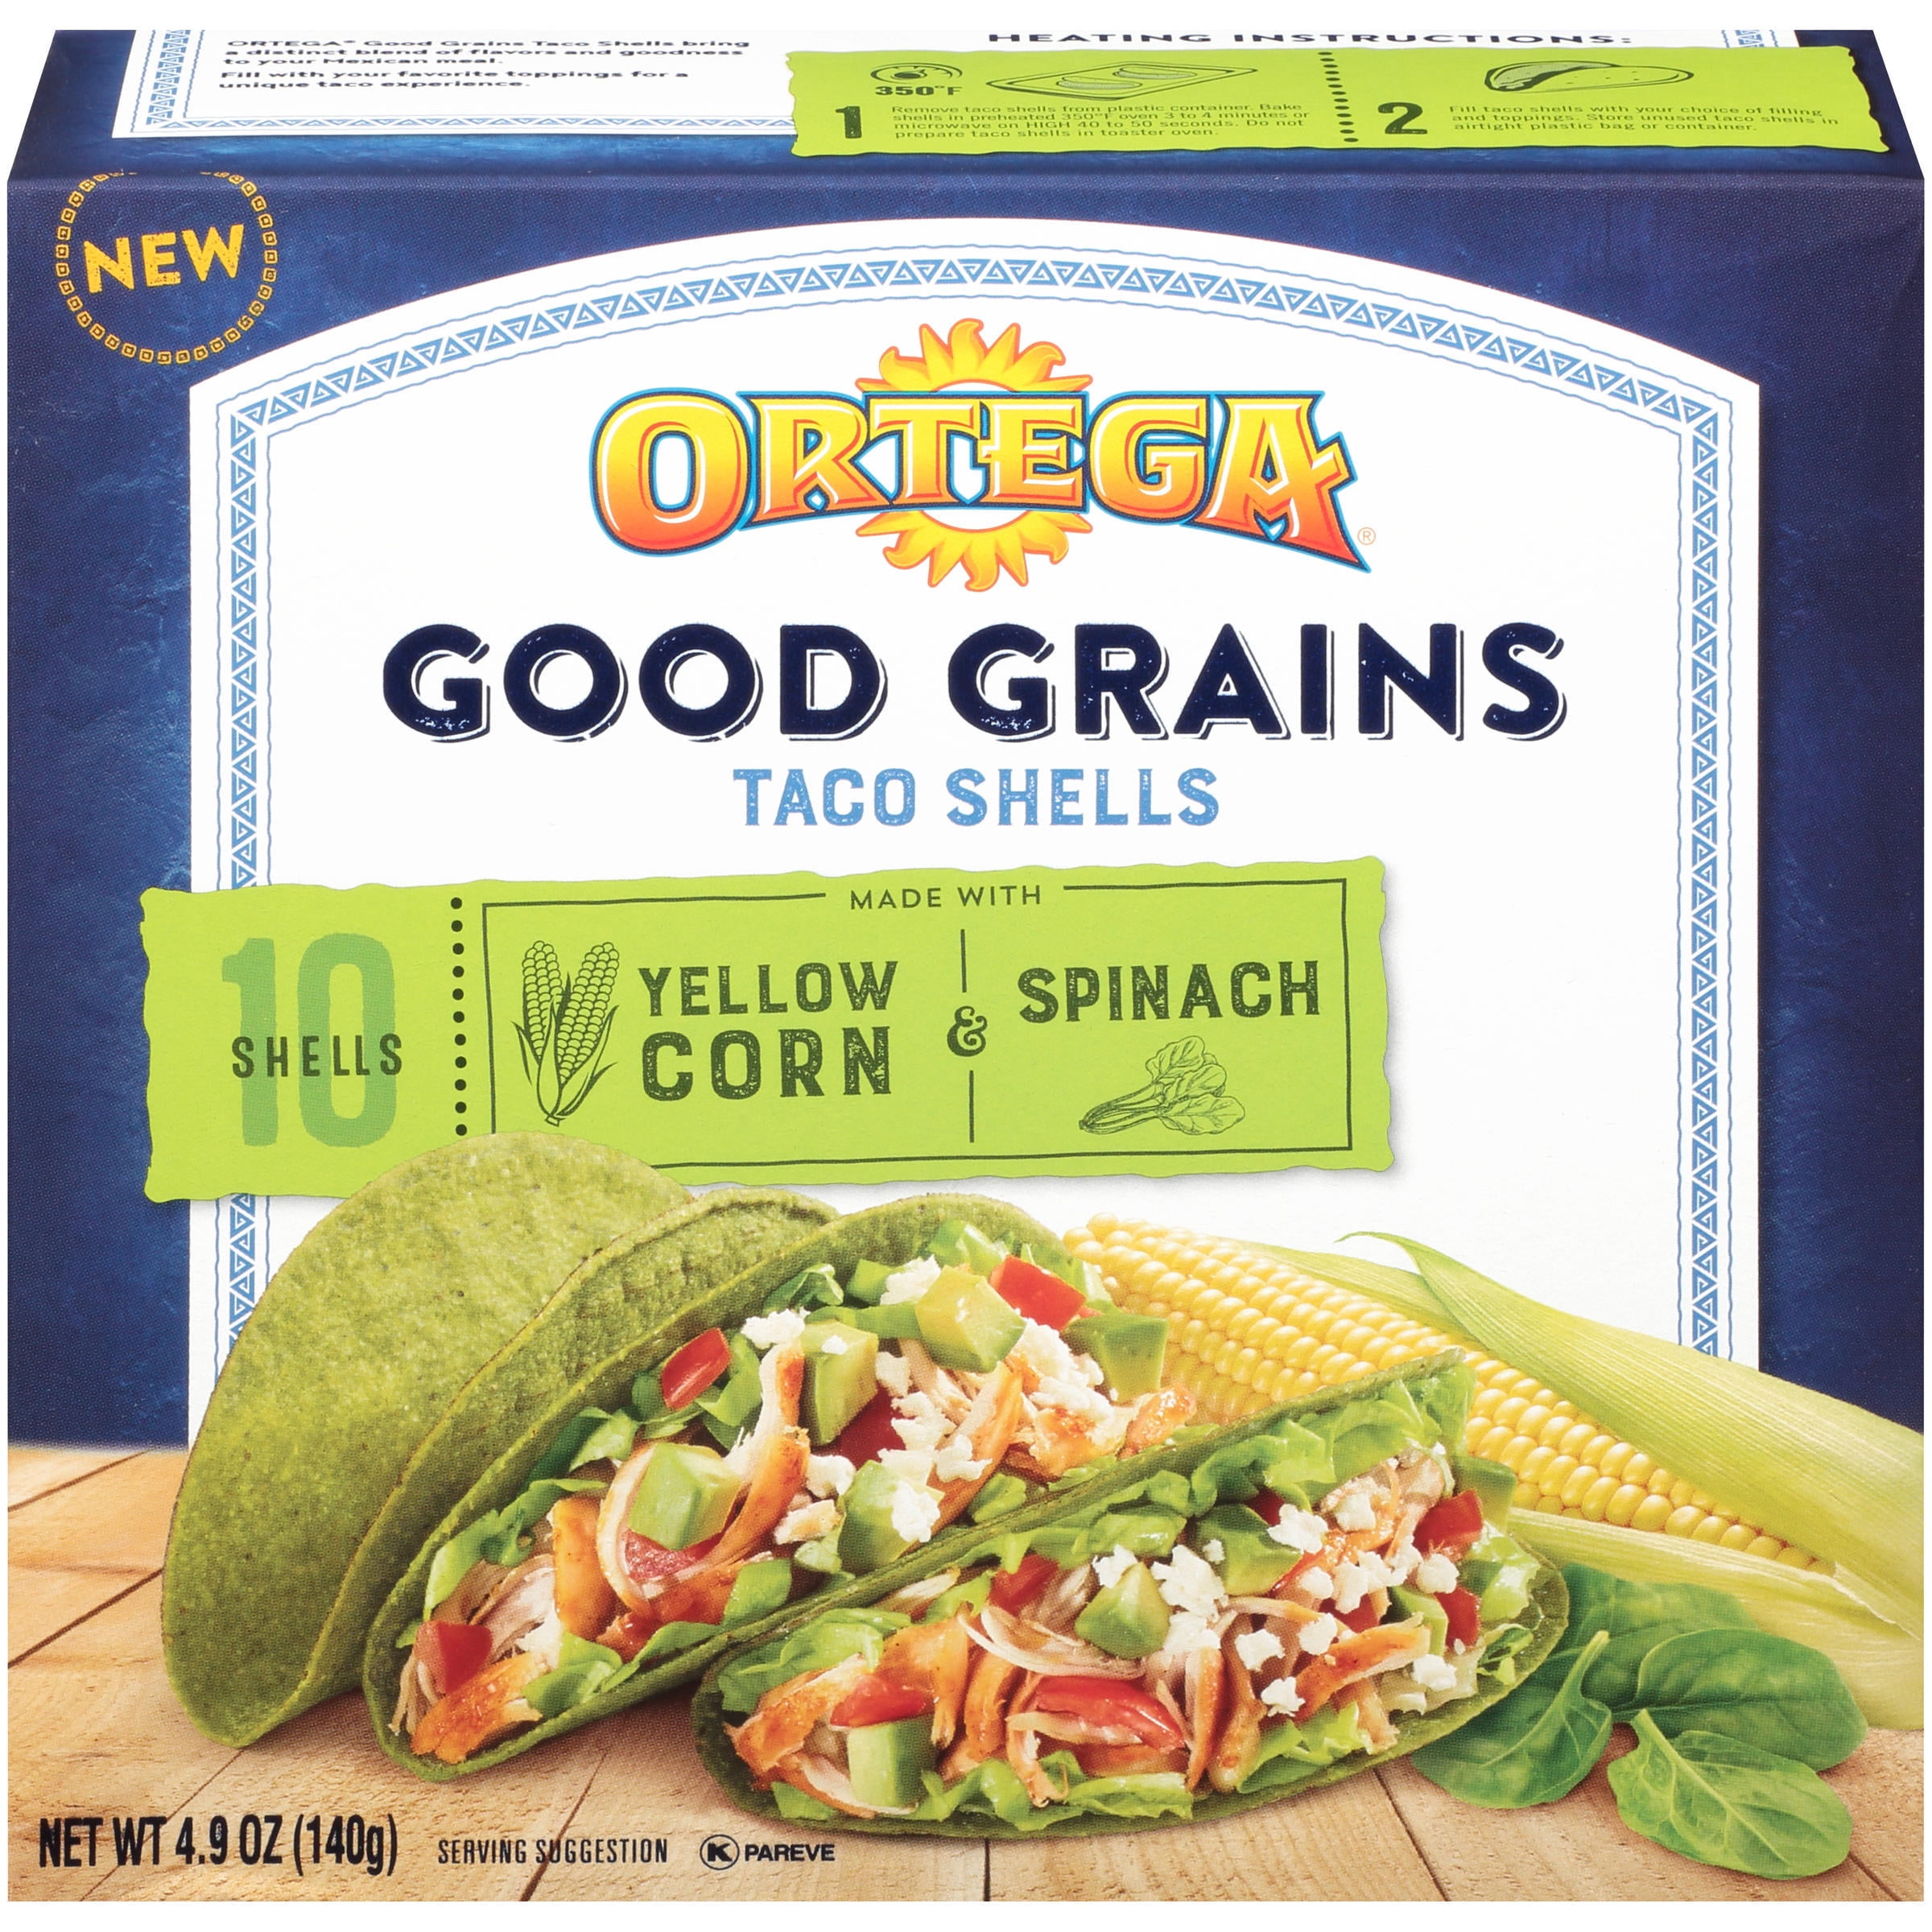 Use Ortega Good Grains Taco Shells Made with Yellow Corn and Spinach in pla...